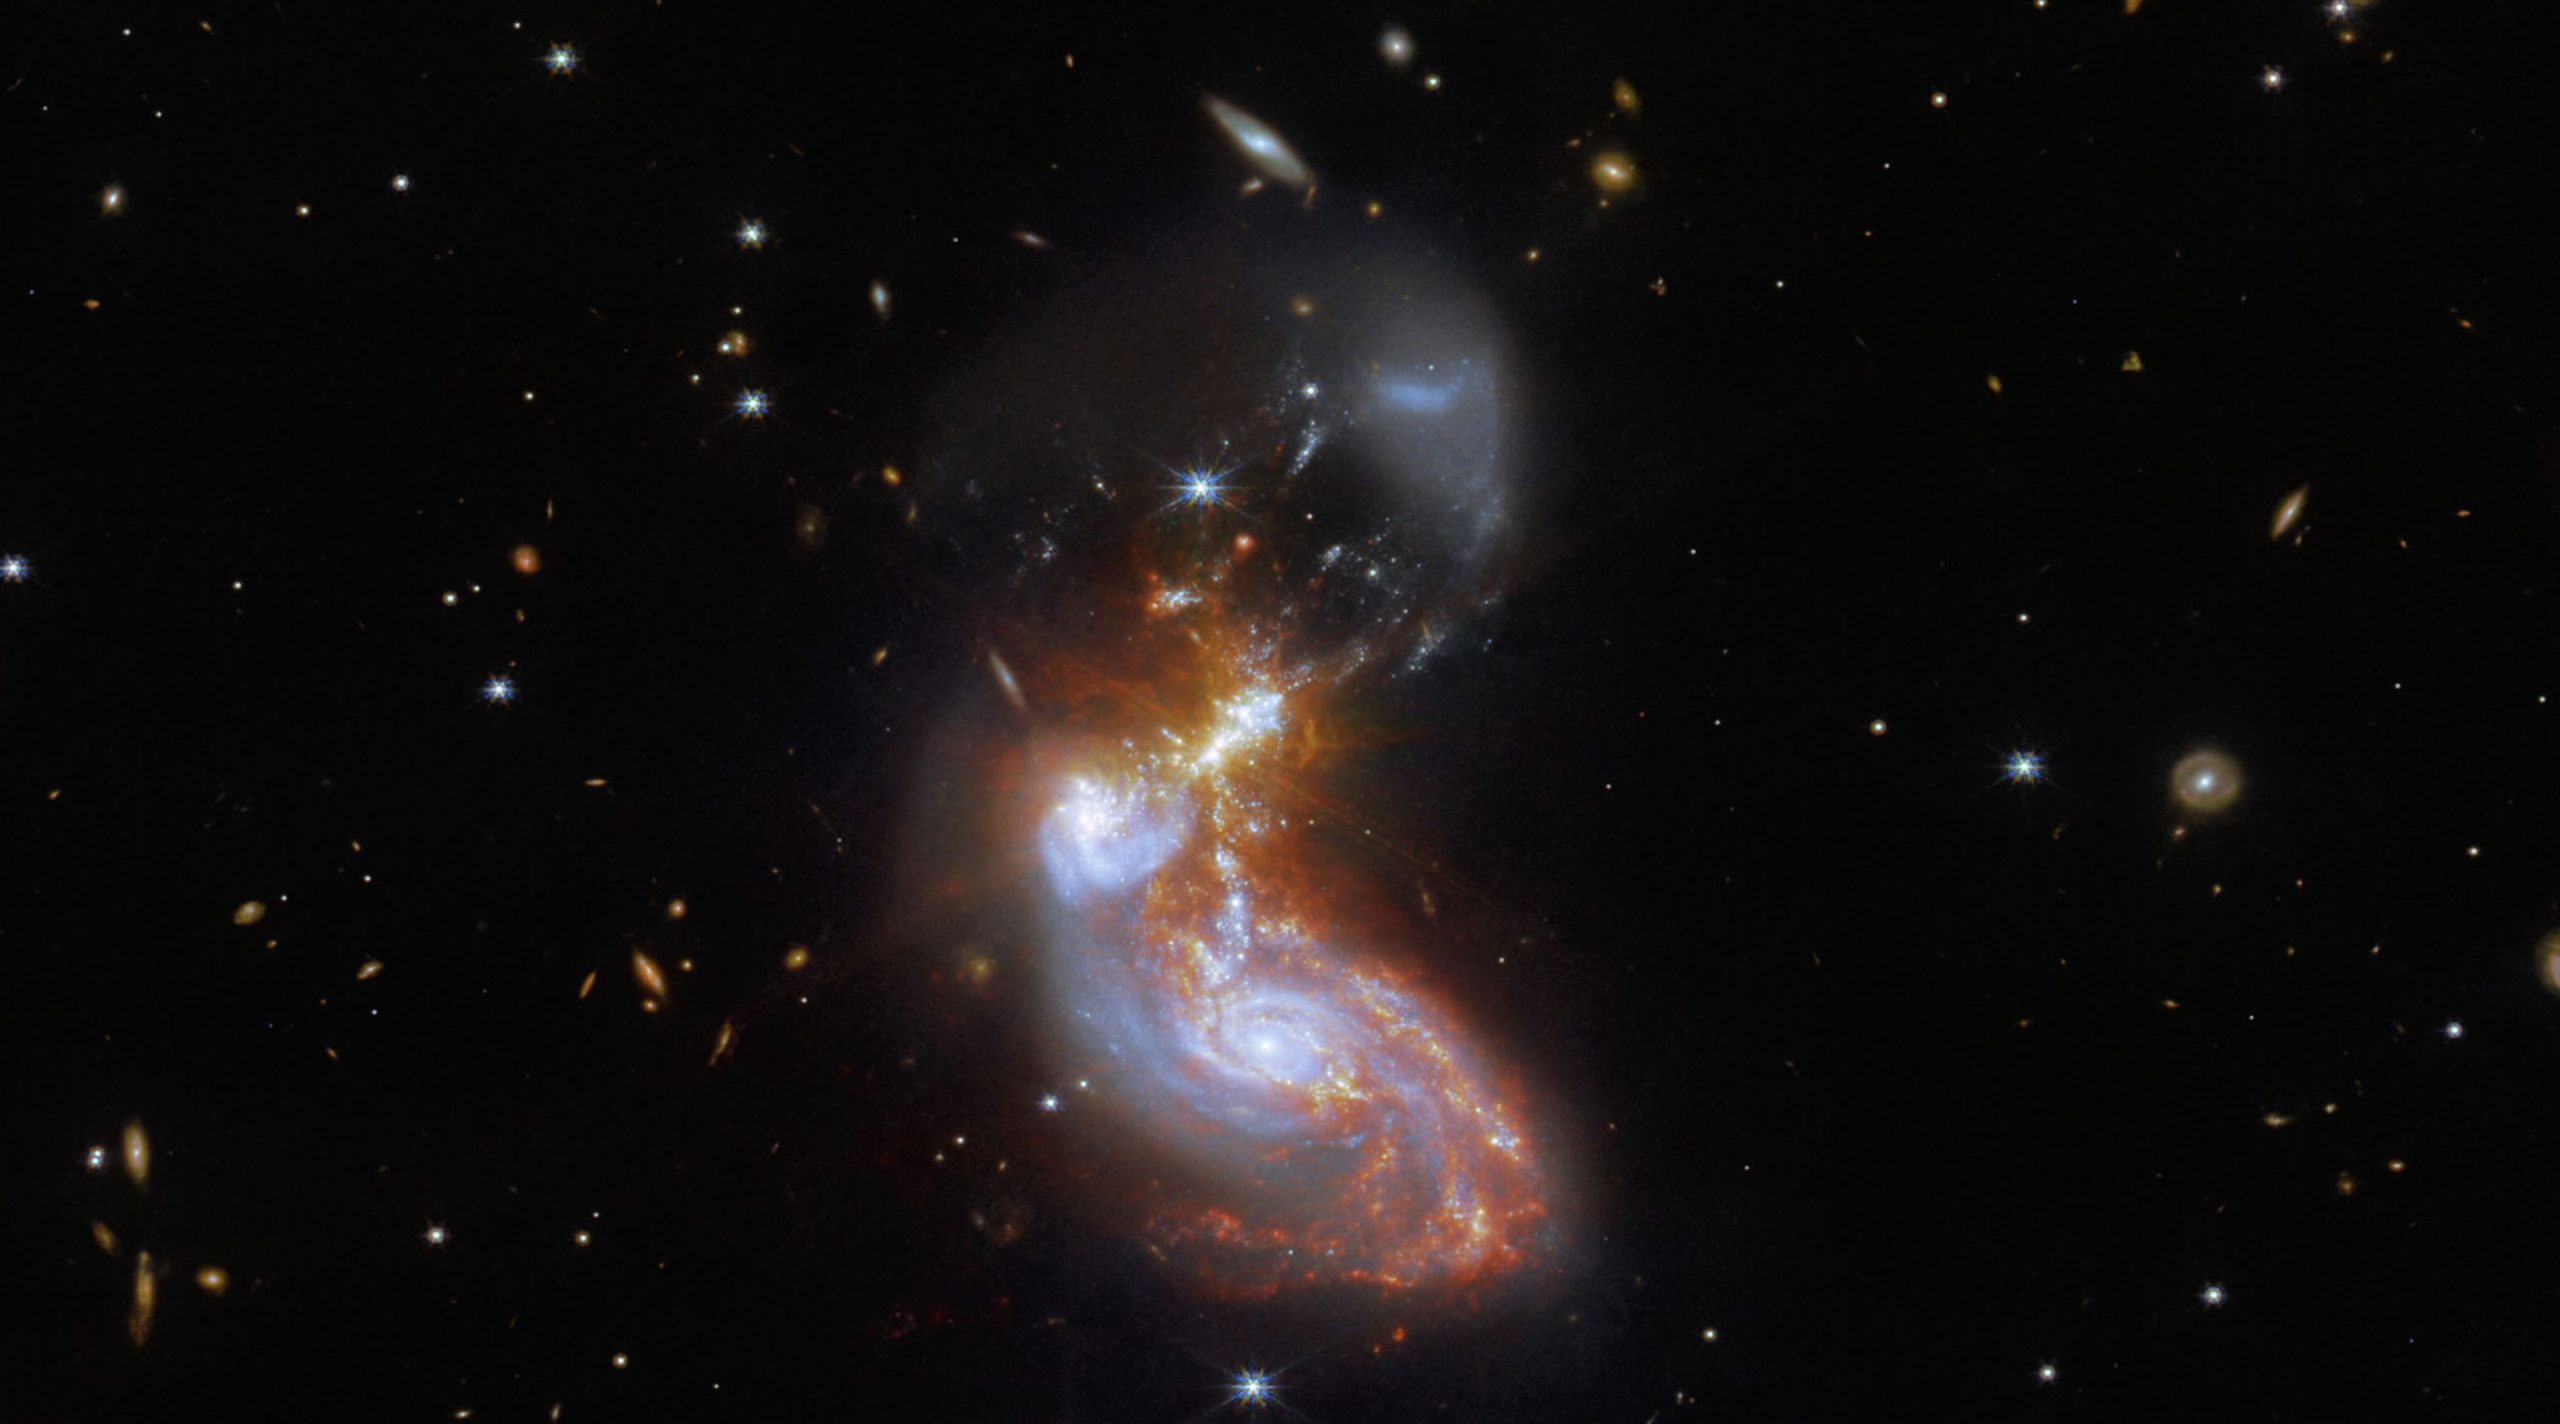 500 million light-years from Earth, these two galaxies are colliding. Image Credit: ESA/Webb, NASA & CSA, L. Armus, A. Evans.